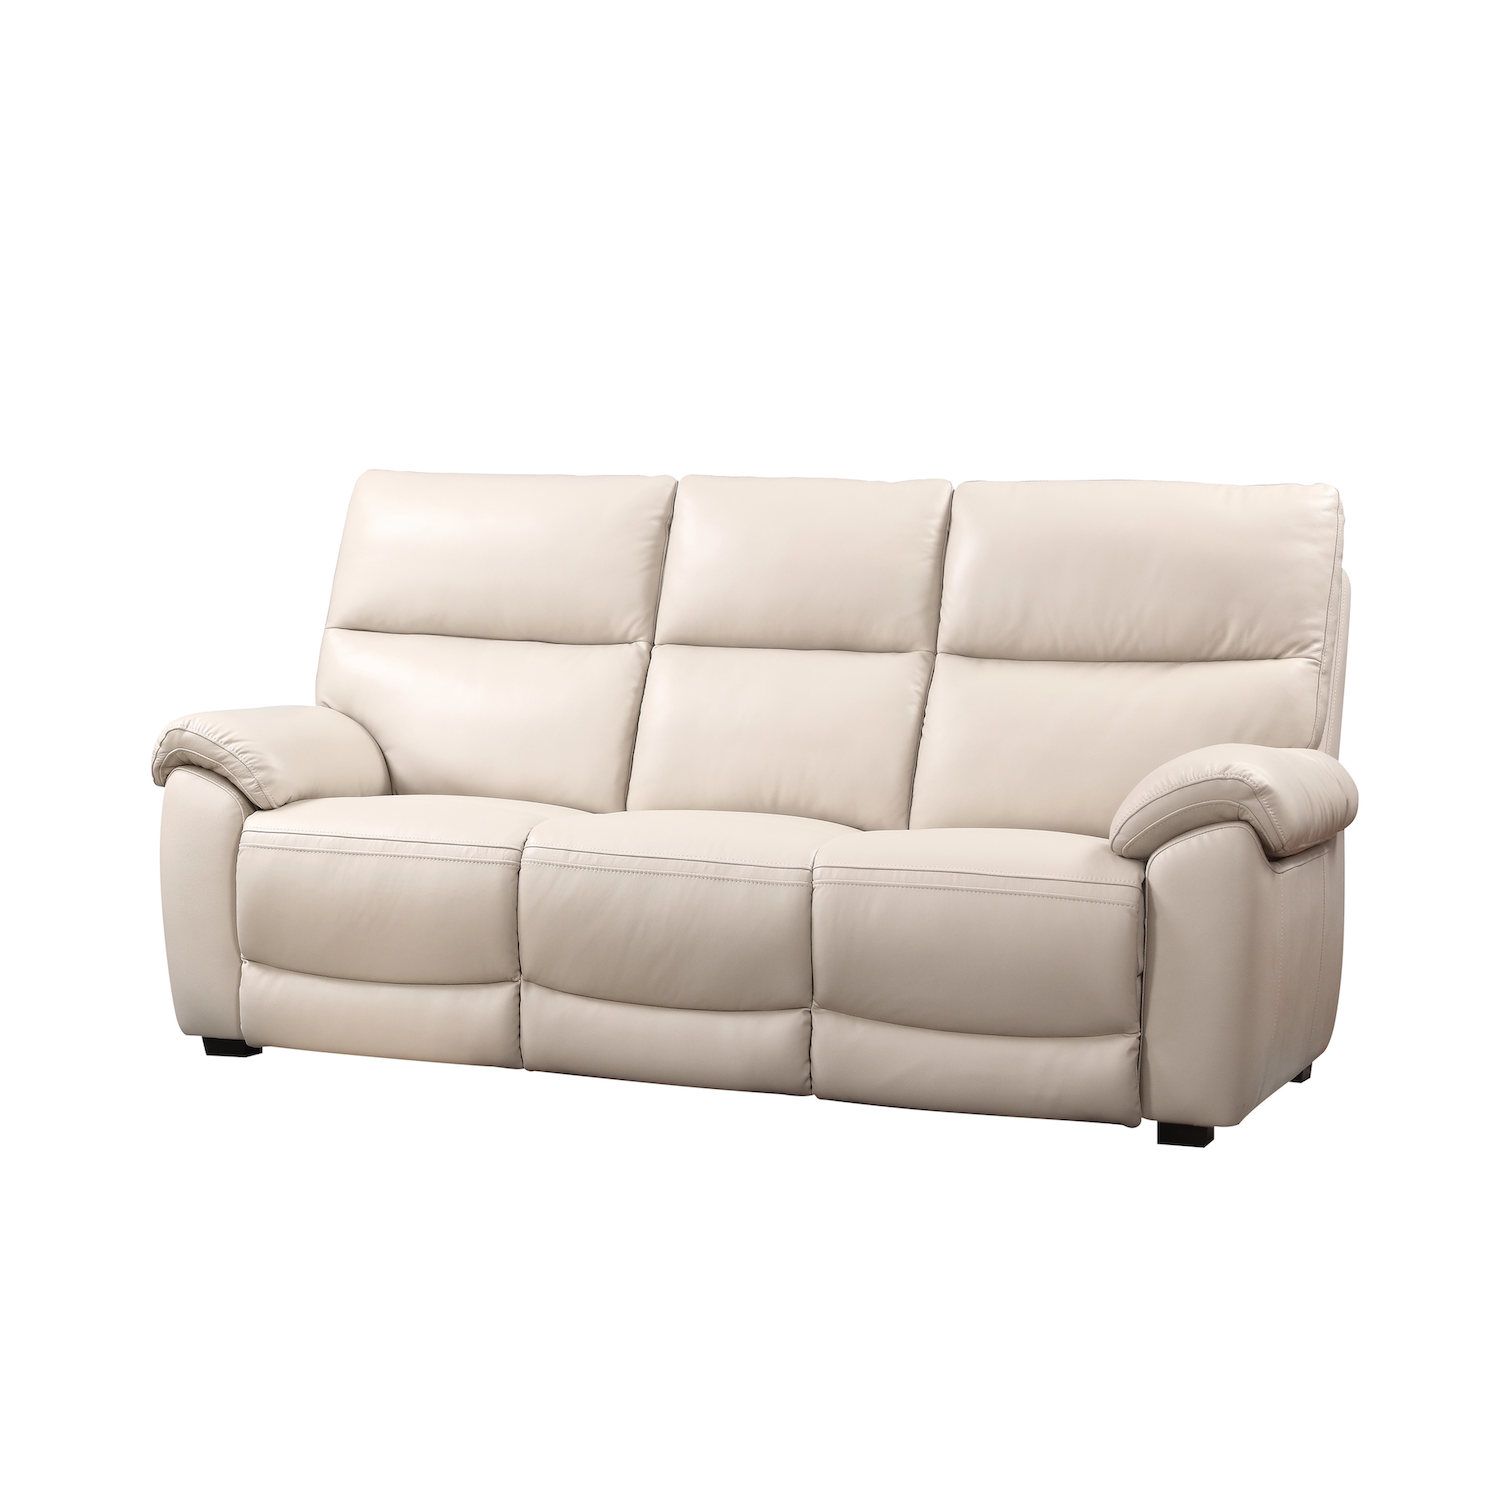 Rocco 3 Seater Power Recliner Chalk Leather